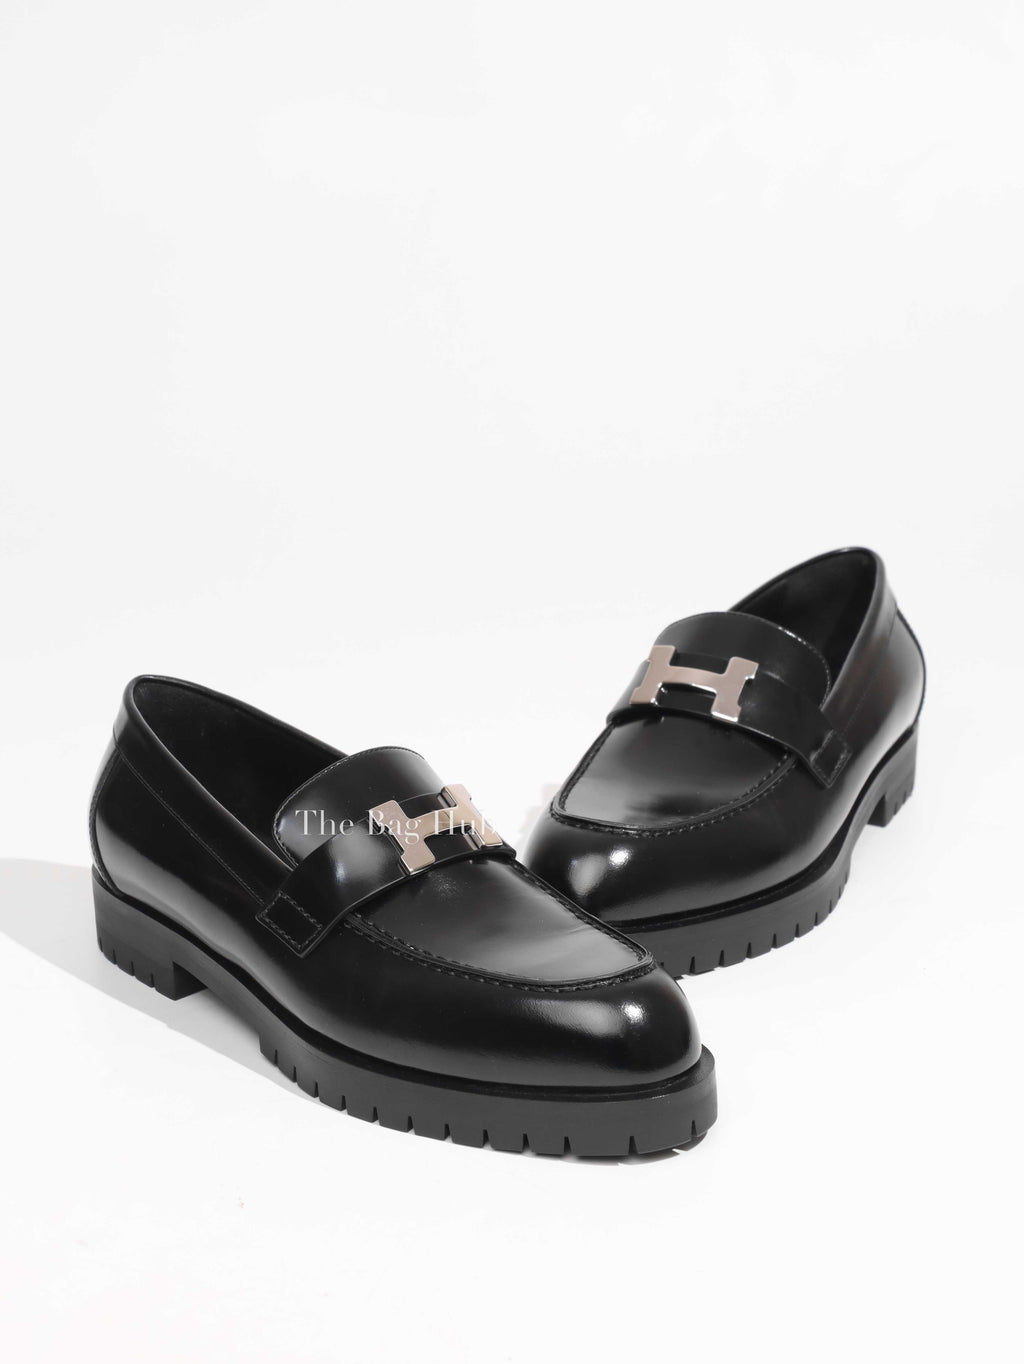 Hermes Black Faubourg Women's Loafers Size 37-1